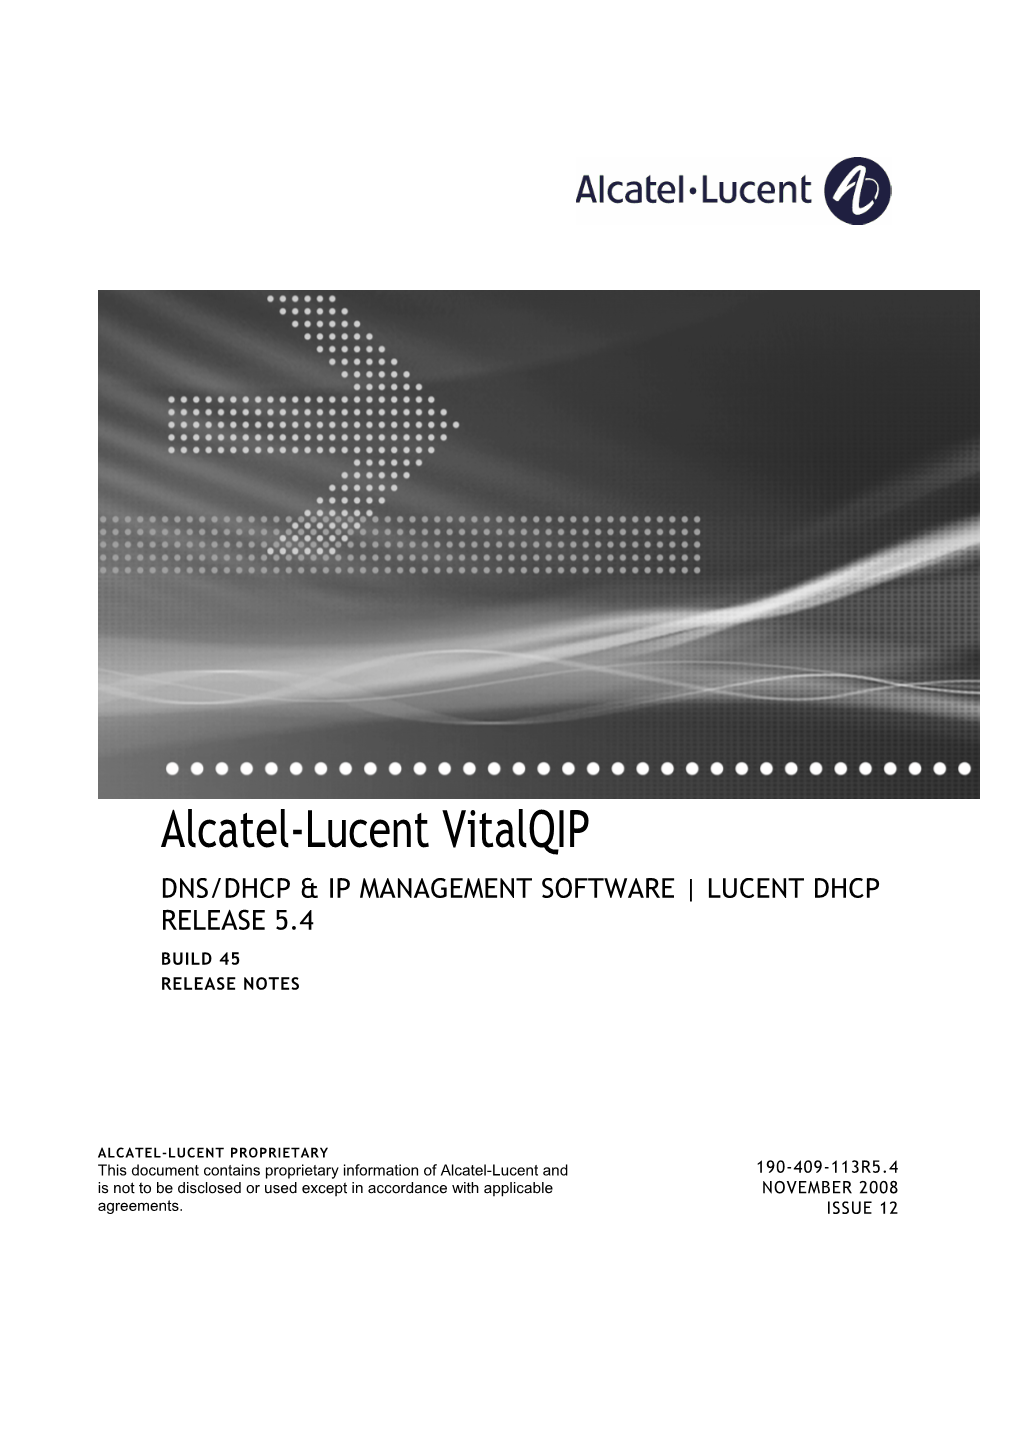 Alcatel-Lucent Vitalqip DNS/DHCP & IP MANAGEMENT SOFTWARE